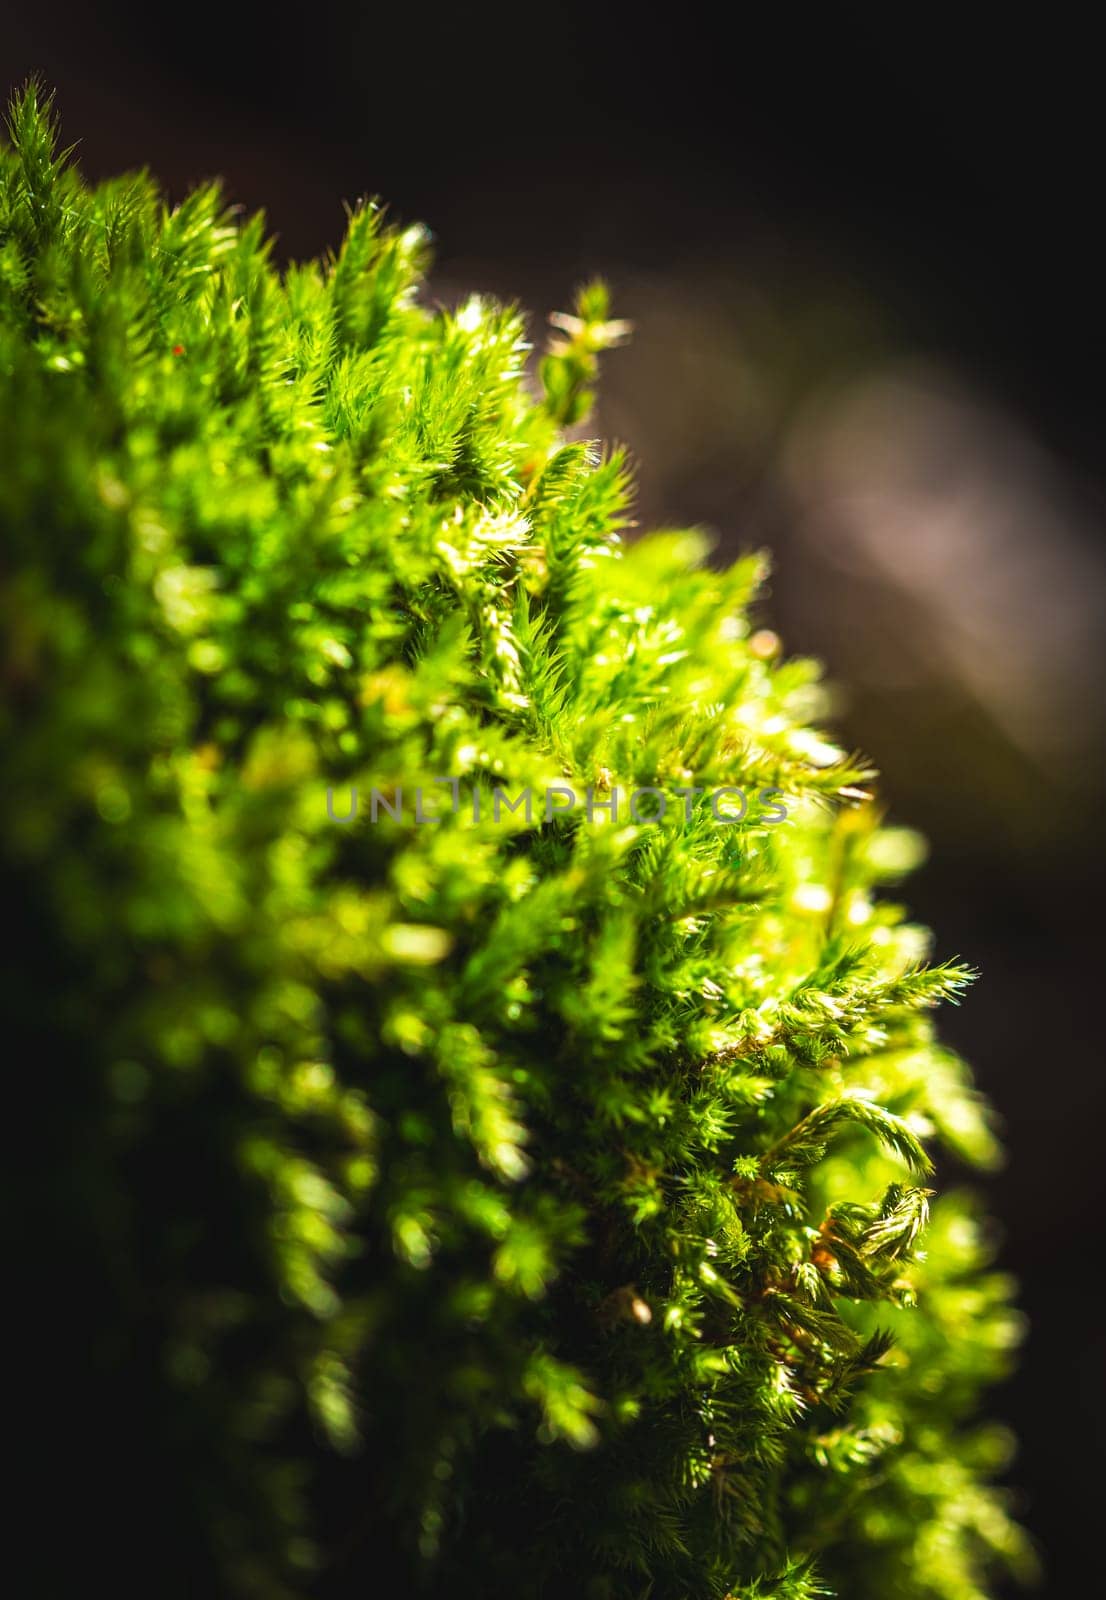 Moss on stone in damp forest. close-up and selective focus by Sonat